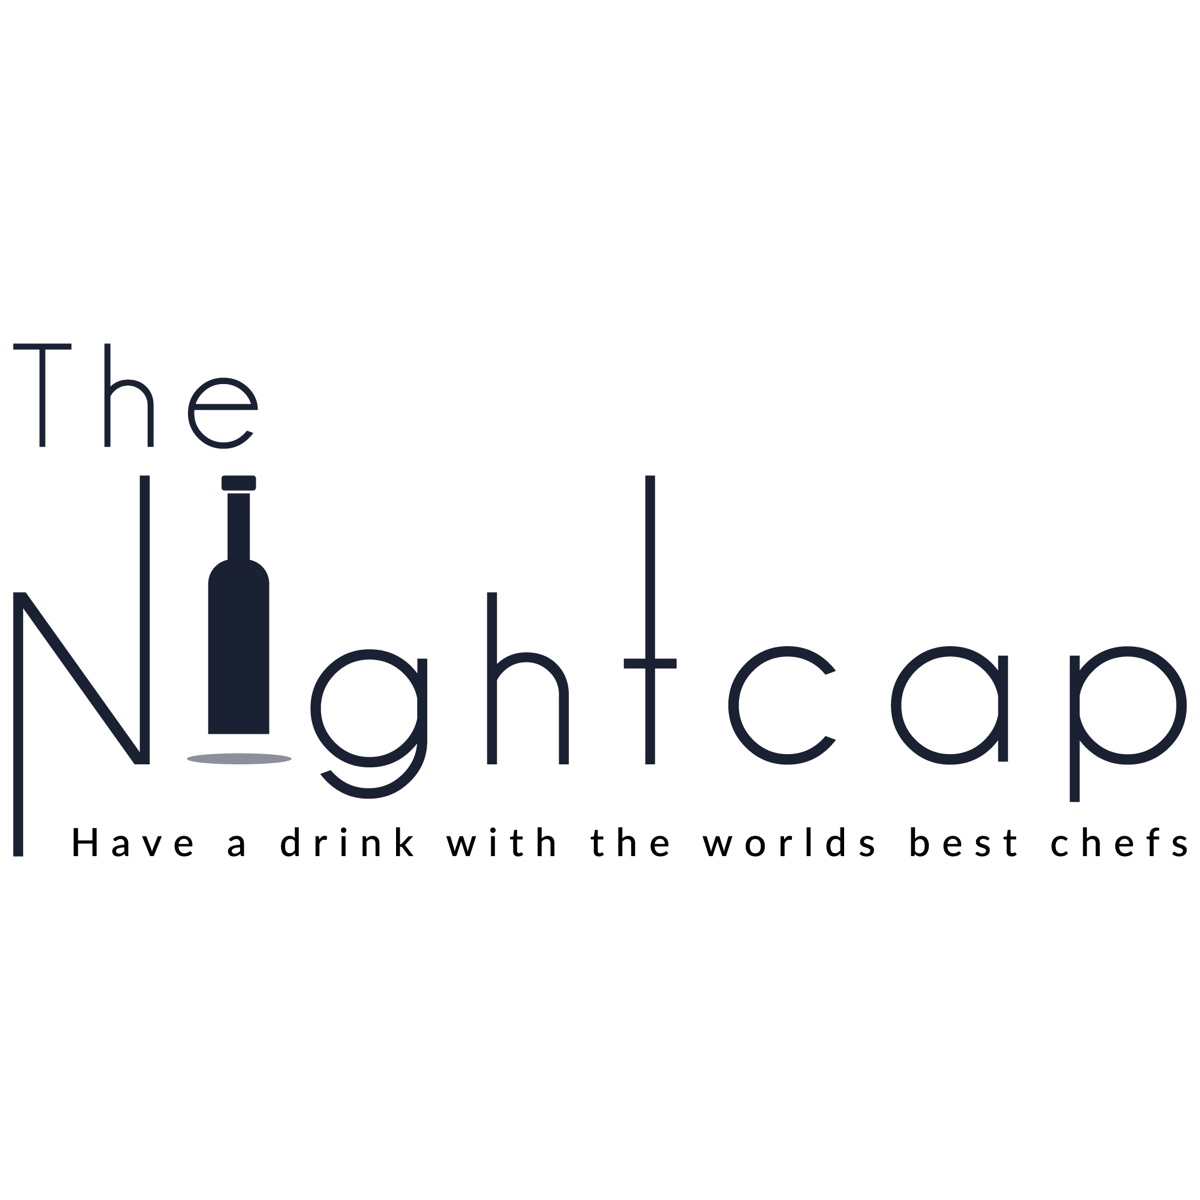 The cover art for The Nightcap. On a white background, the podcast's title is written in black sans-serif text. The "i" in "nightcap" is stylized like a wine bottle. The subtitle reads, "Have a drink with the worlds [sic] best chefs"